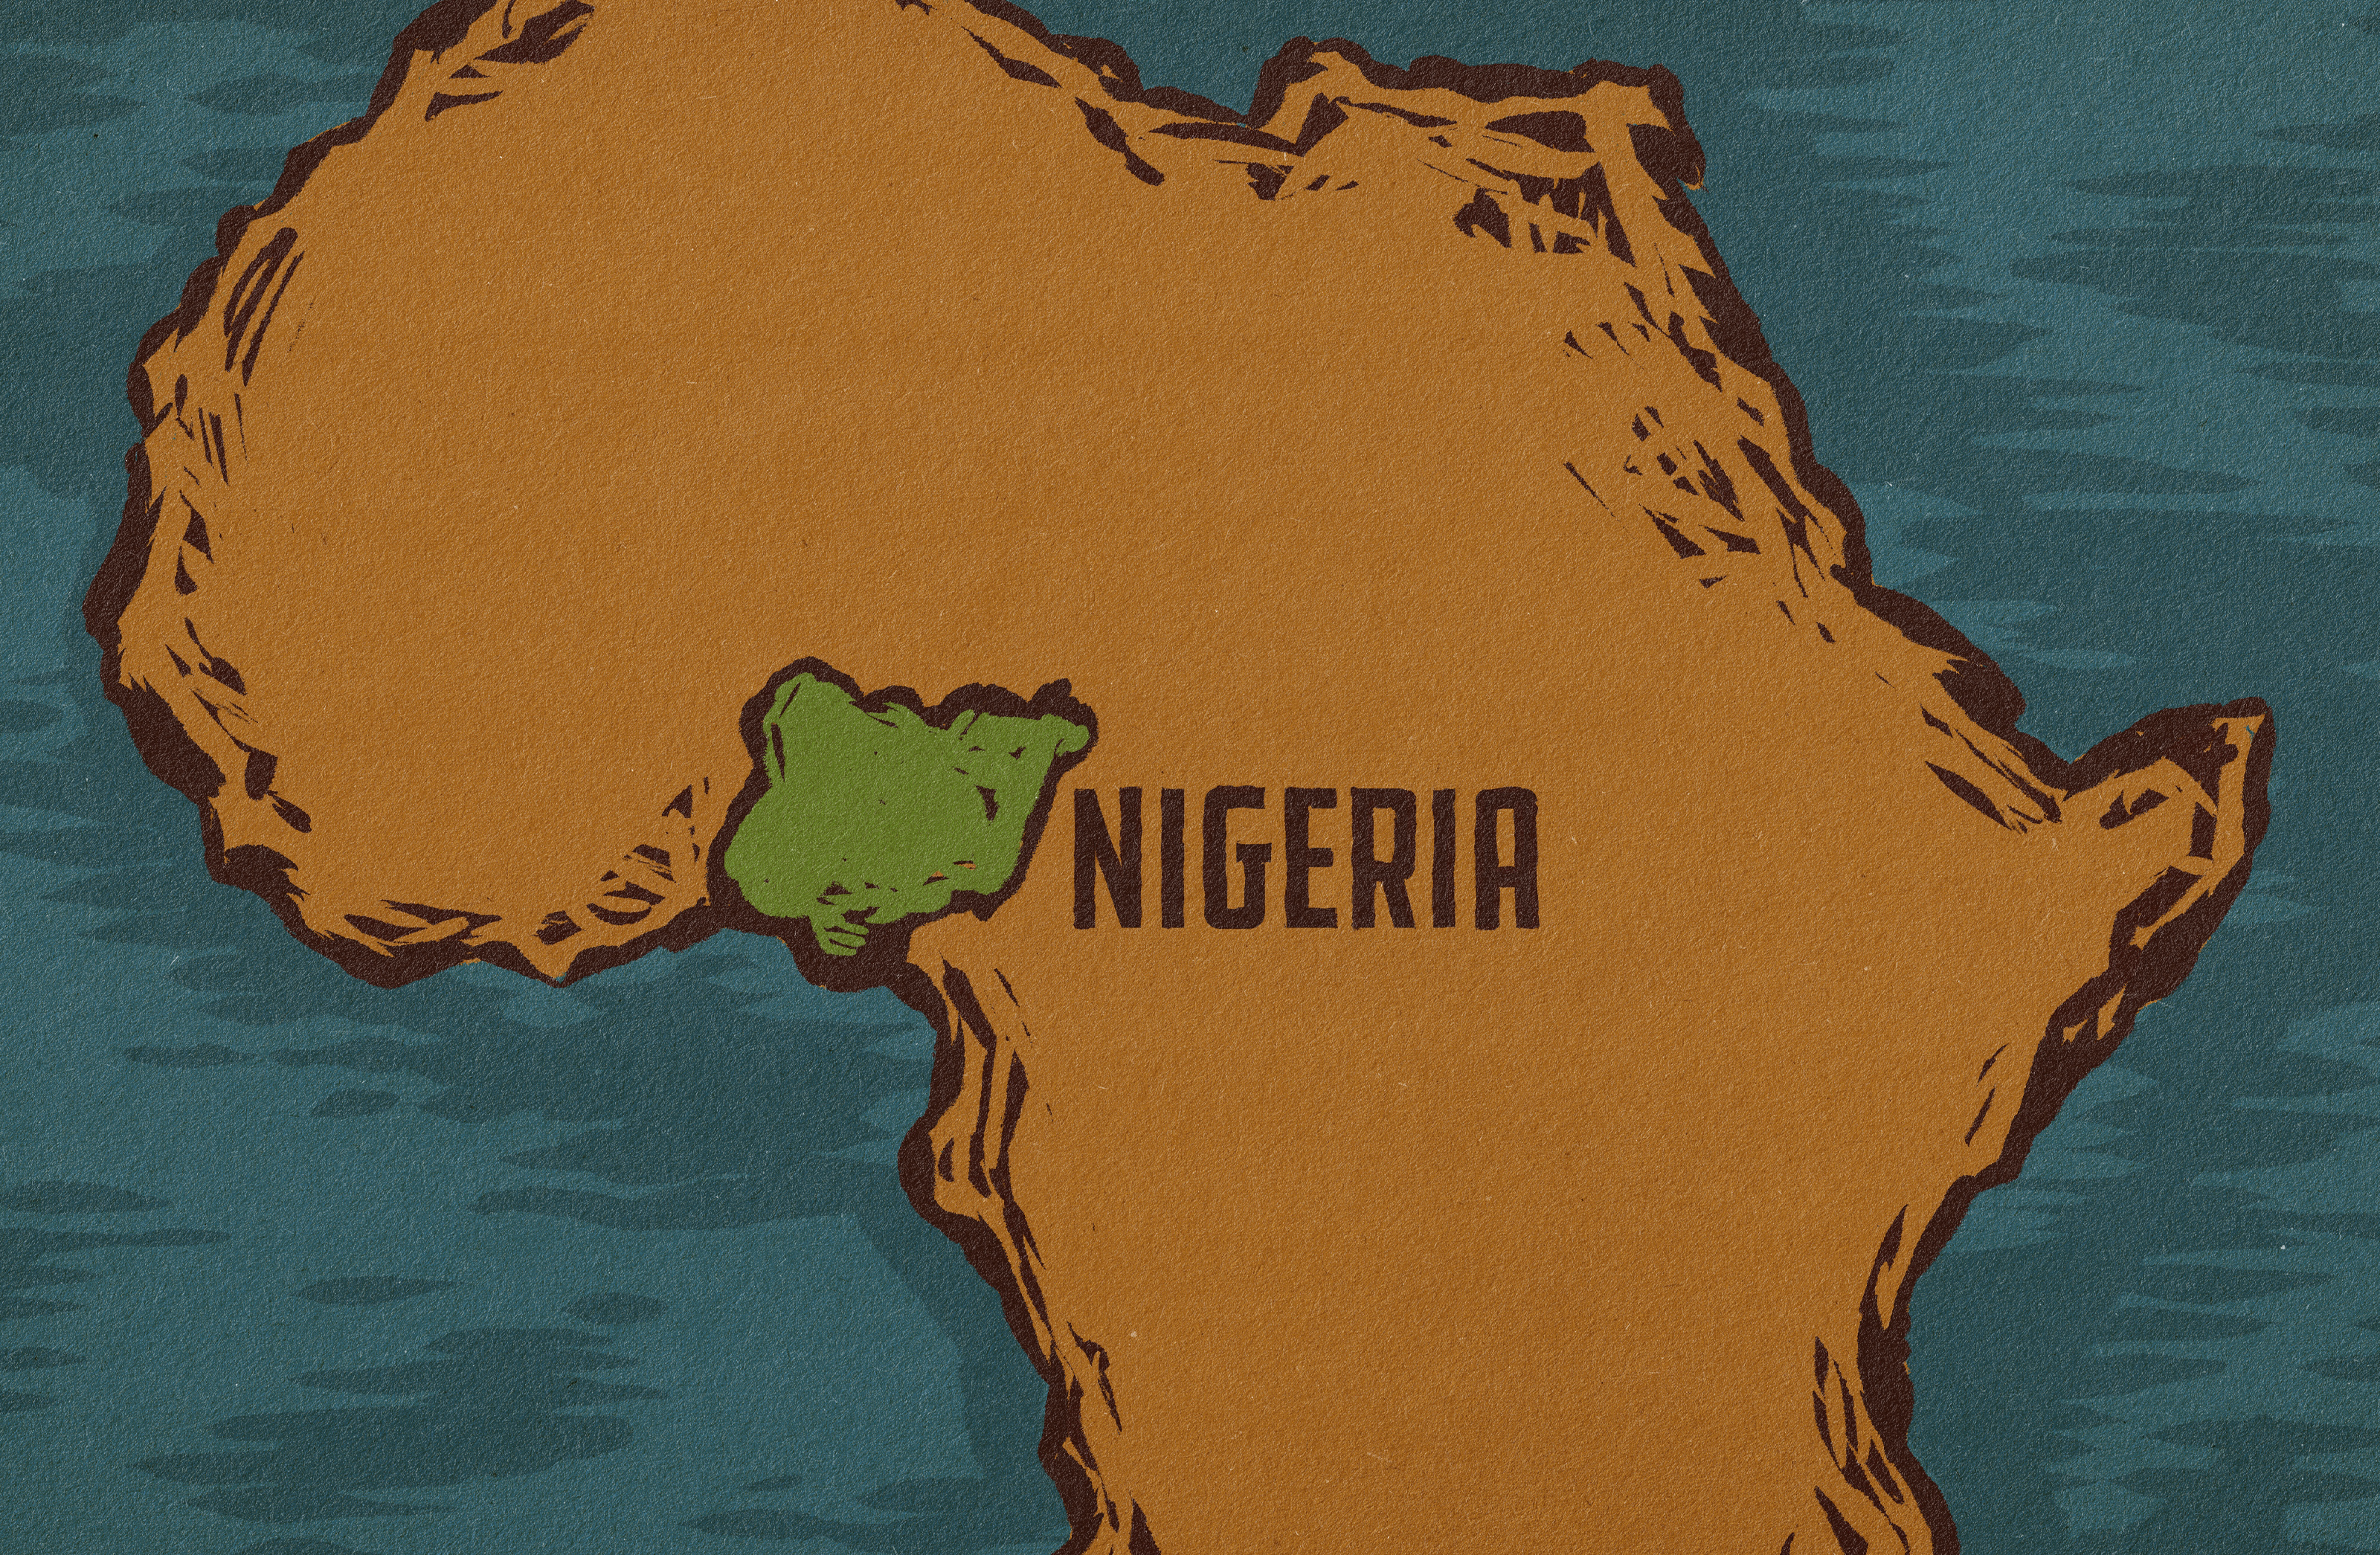 illustrated map of Nigeria within the African continent